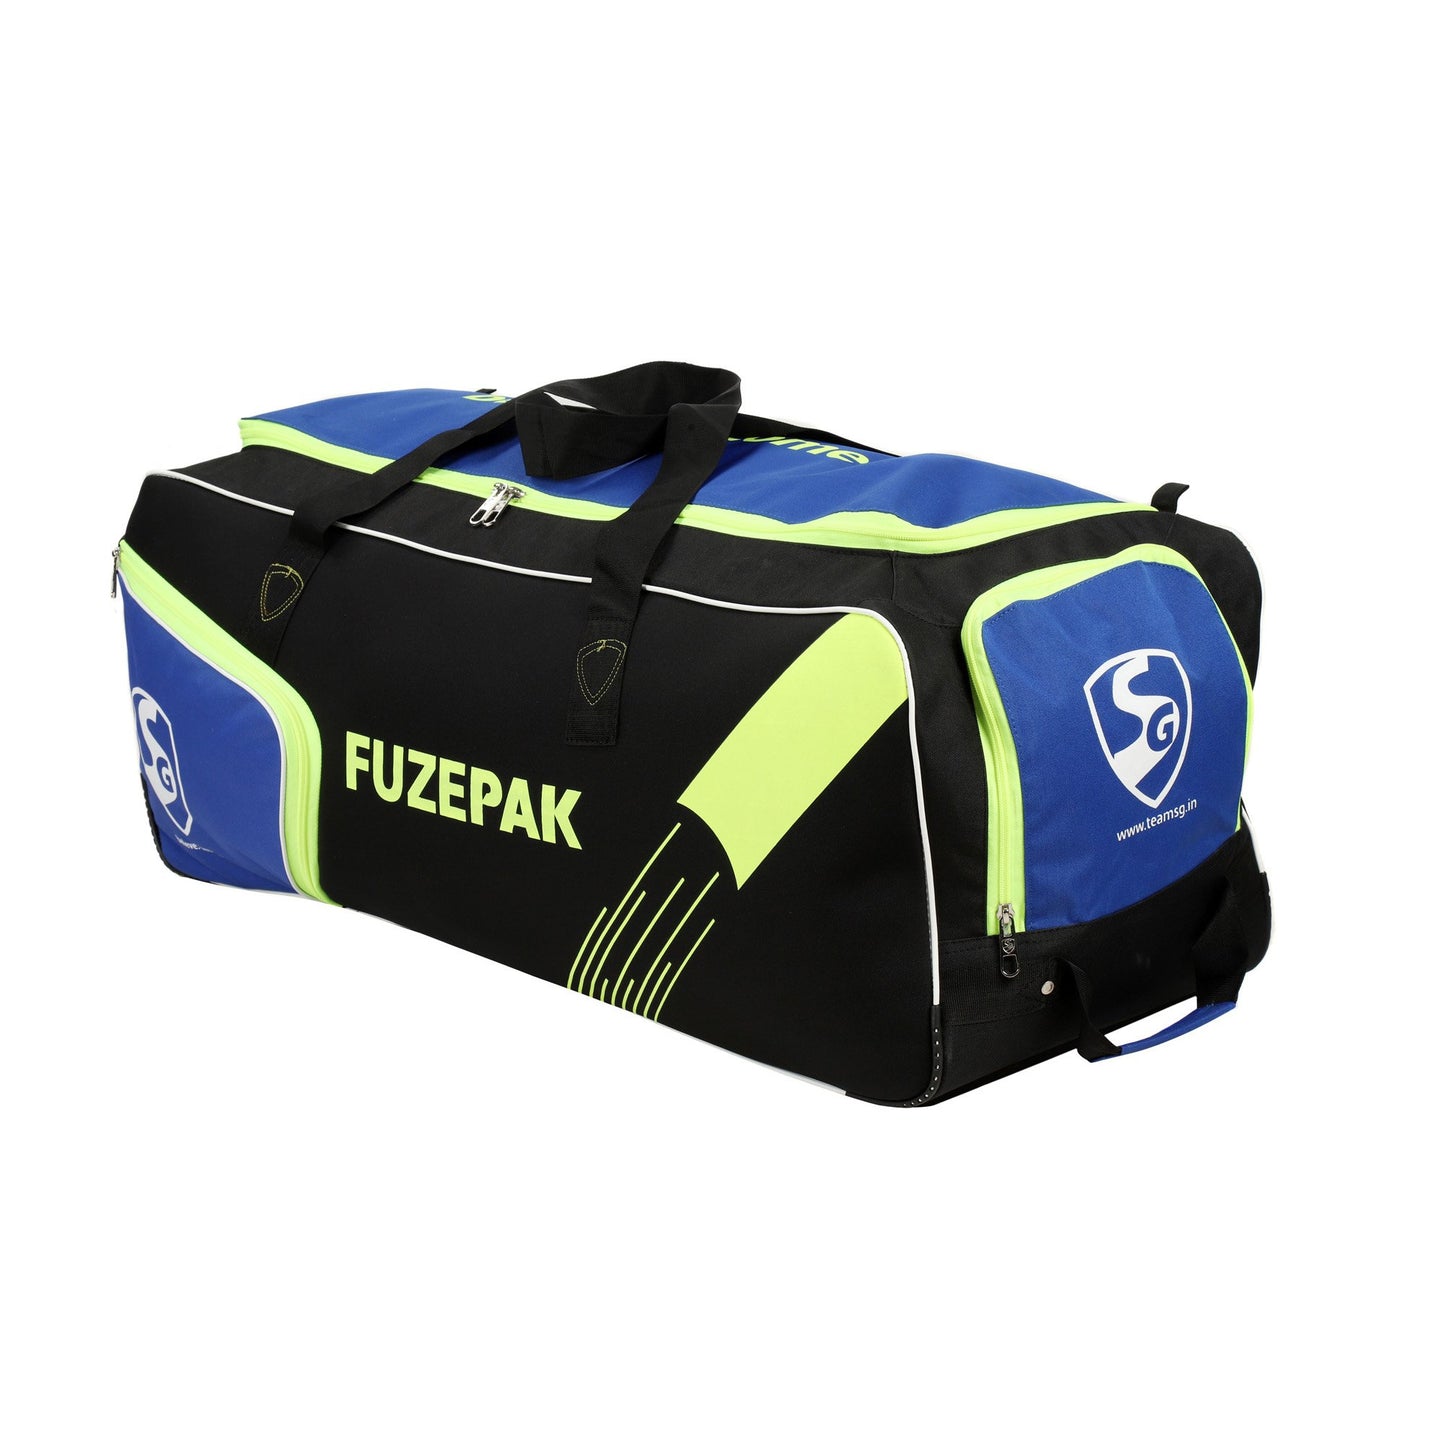 SG Fuzepak kit bag with shoe compartment with wheel